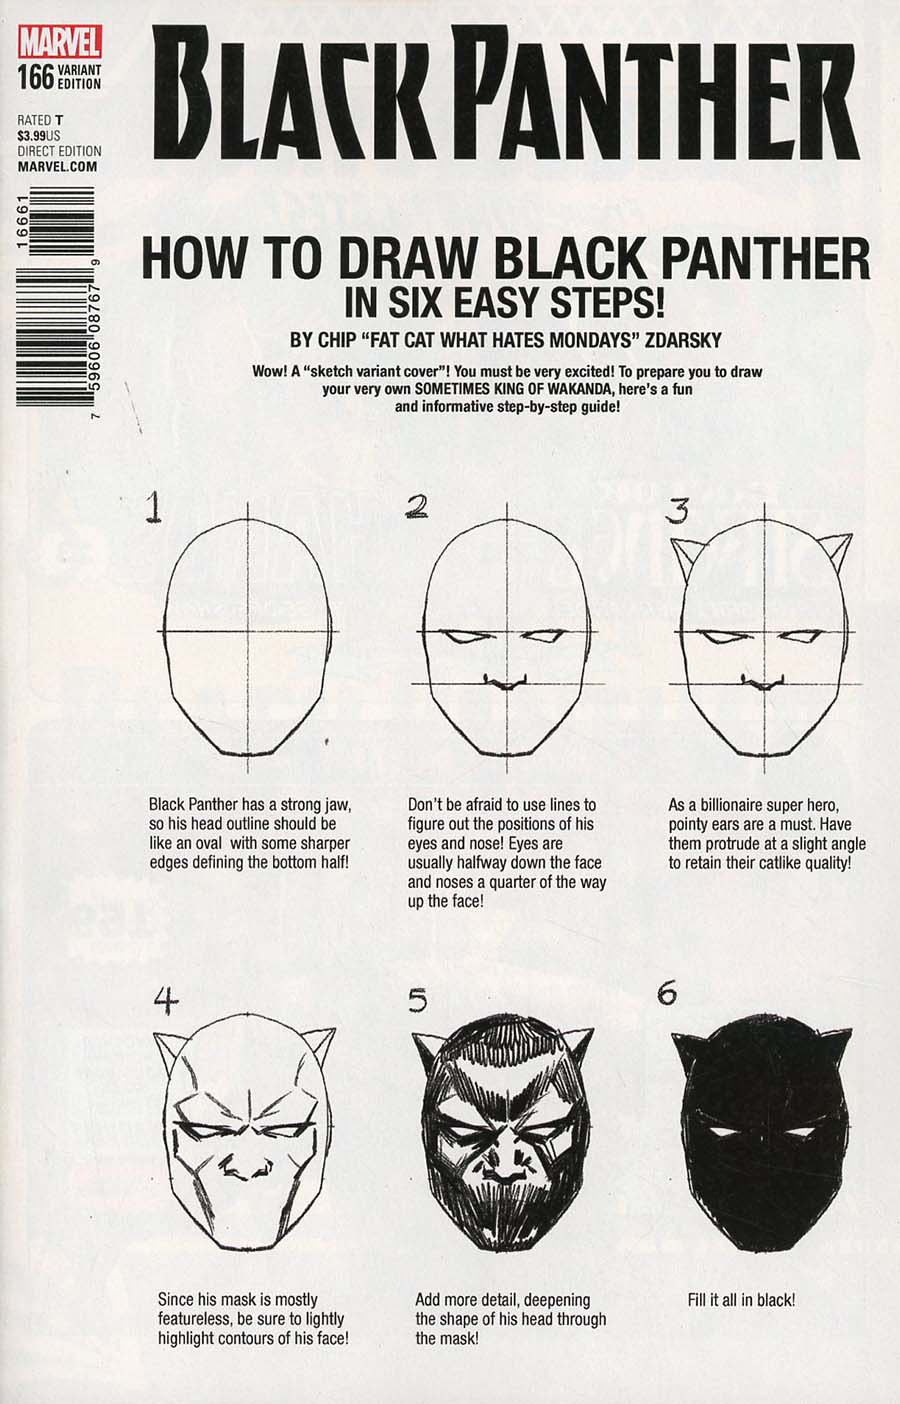 Black Panther Vol 6 #166 Cover D Variant Chip Zdarsky How-To-Draw Cover (Marvel Legacy Tie-In)